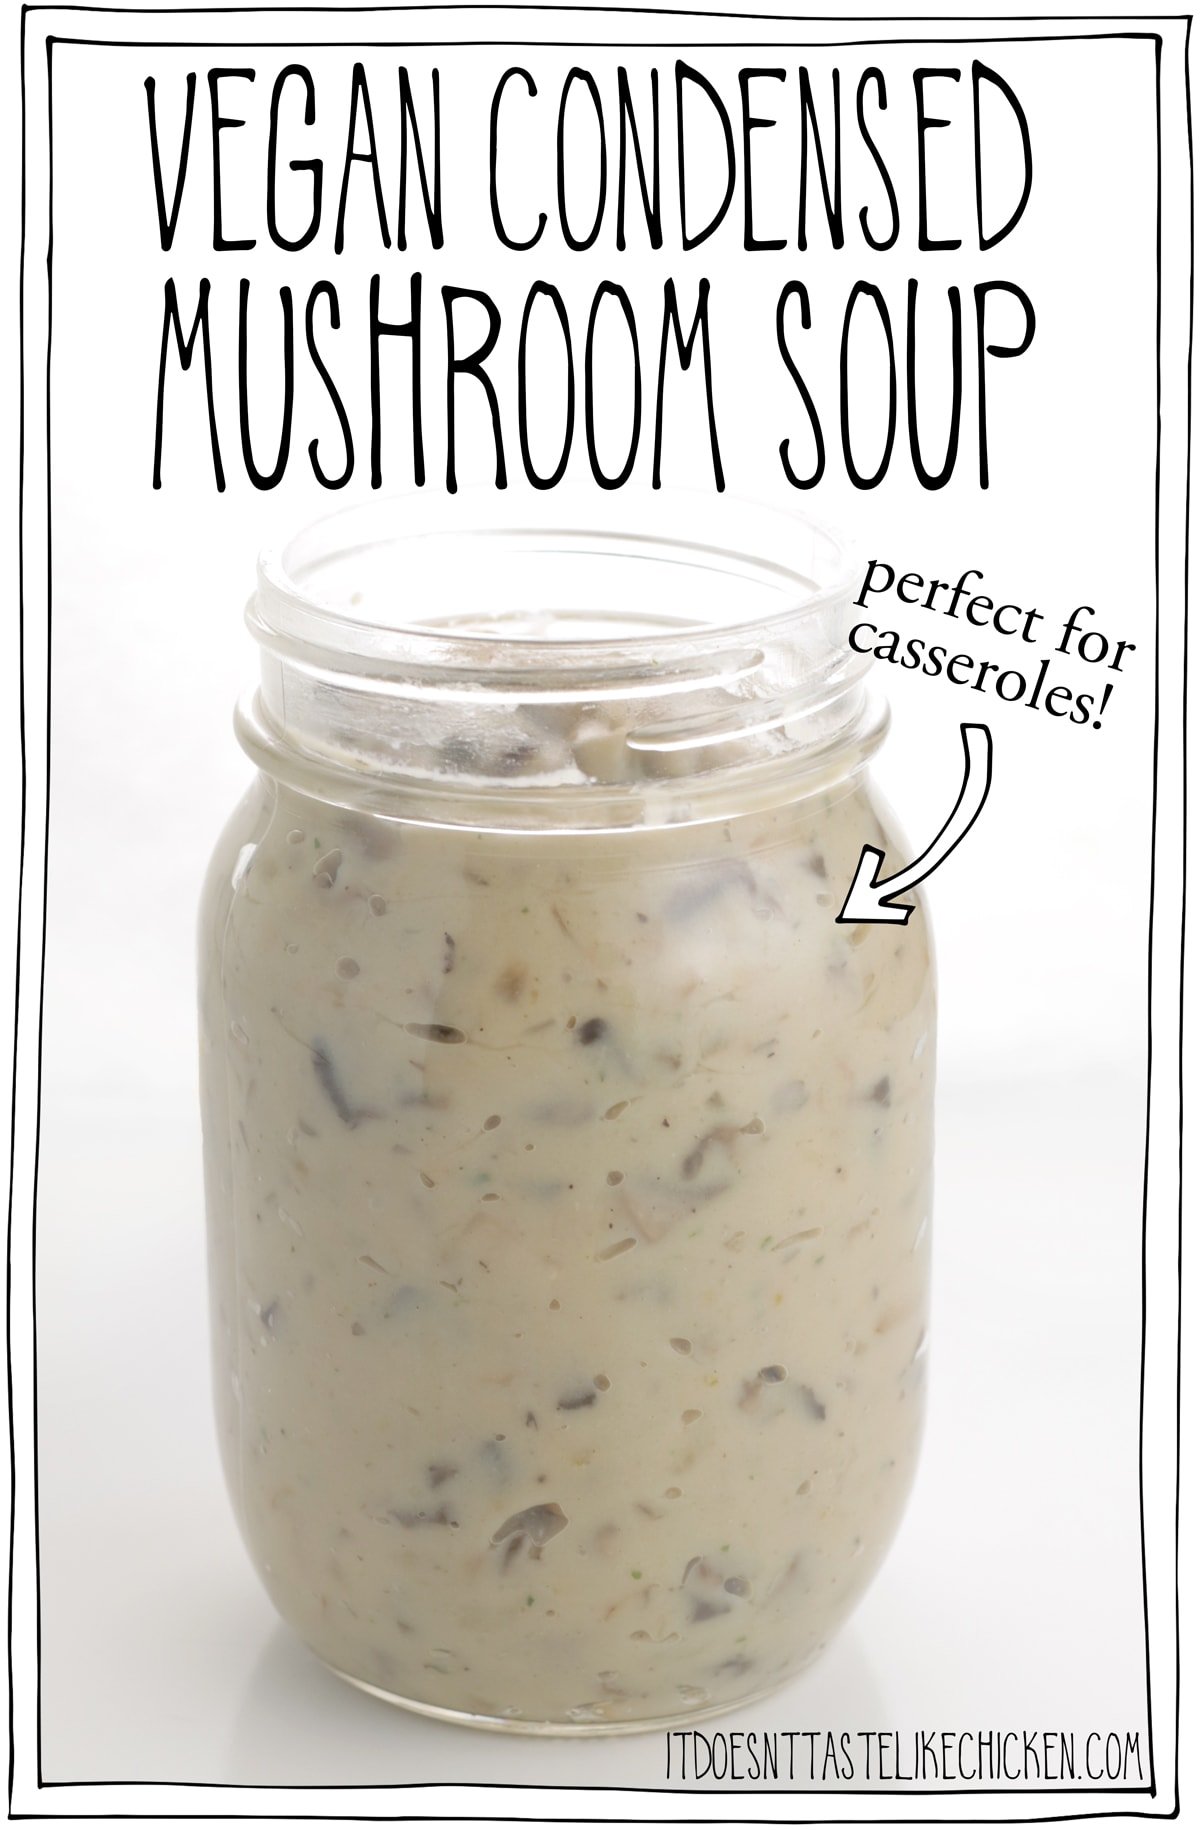 Vegan Condensed Mushroom Soup is perfect for casseroles such as green bean casserole or you can use it to make a quick cream of mushroom soup. 1 recipe is equivalent to 1 can of soup. Gluten-free and oil-free options and freezer-friendly! #itdoesnttastelikechicken #veganrecipes #veganthanksgiving